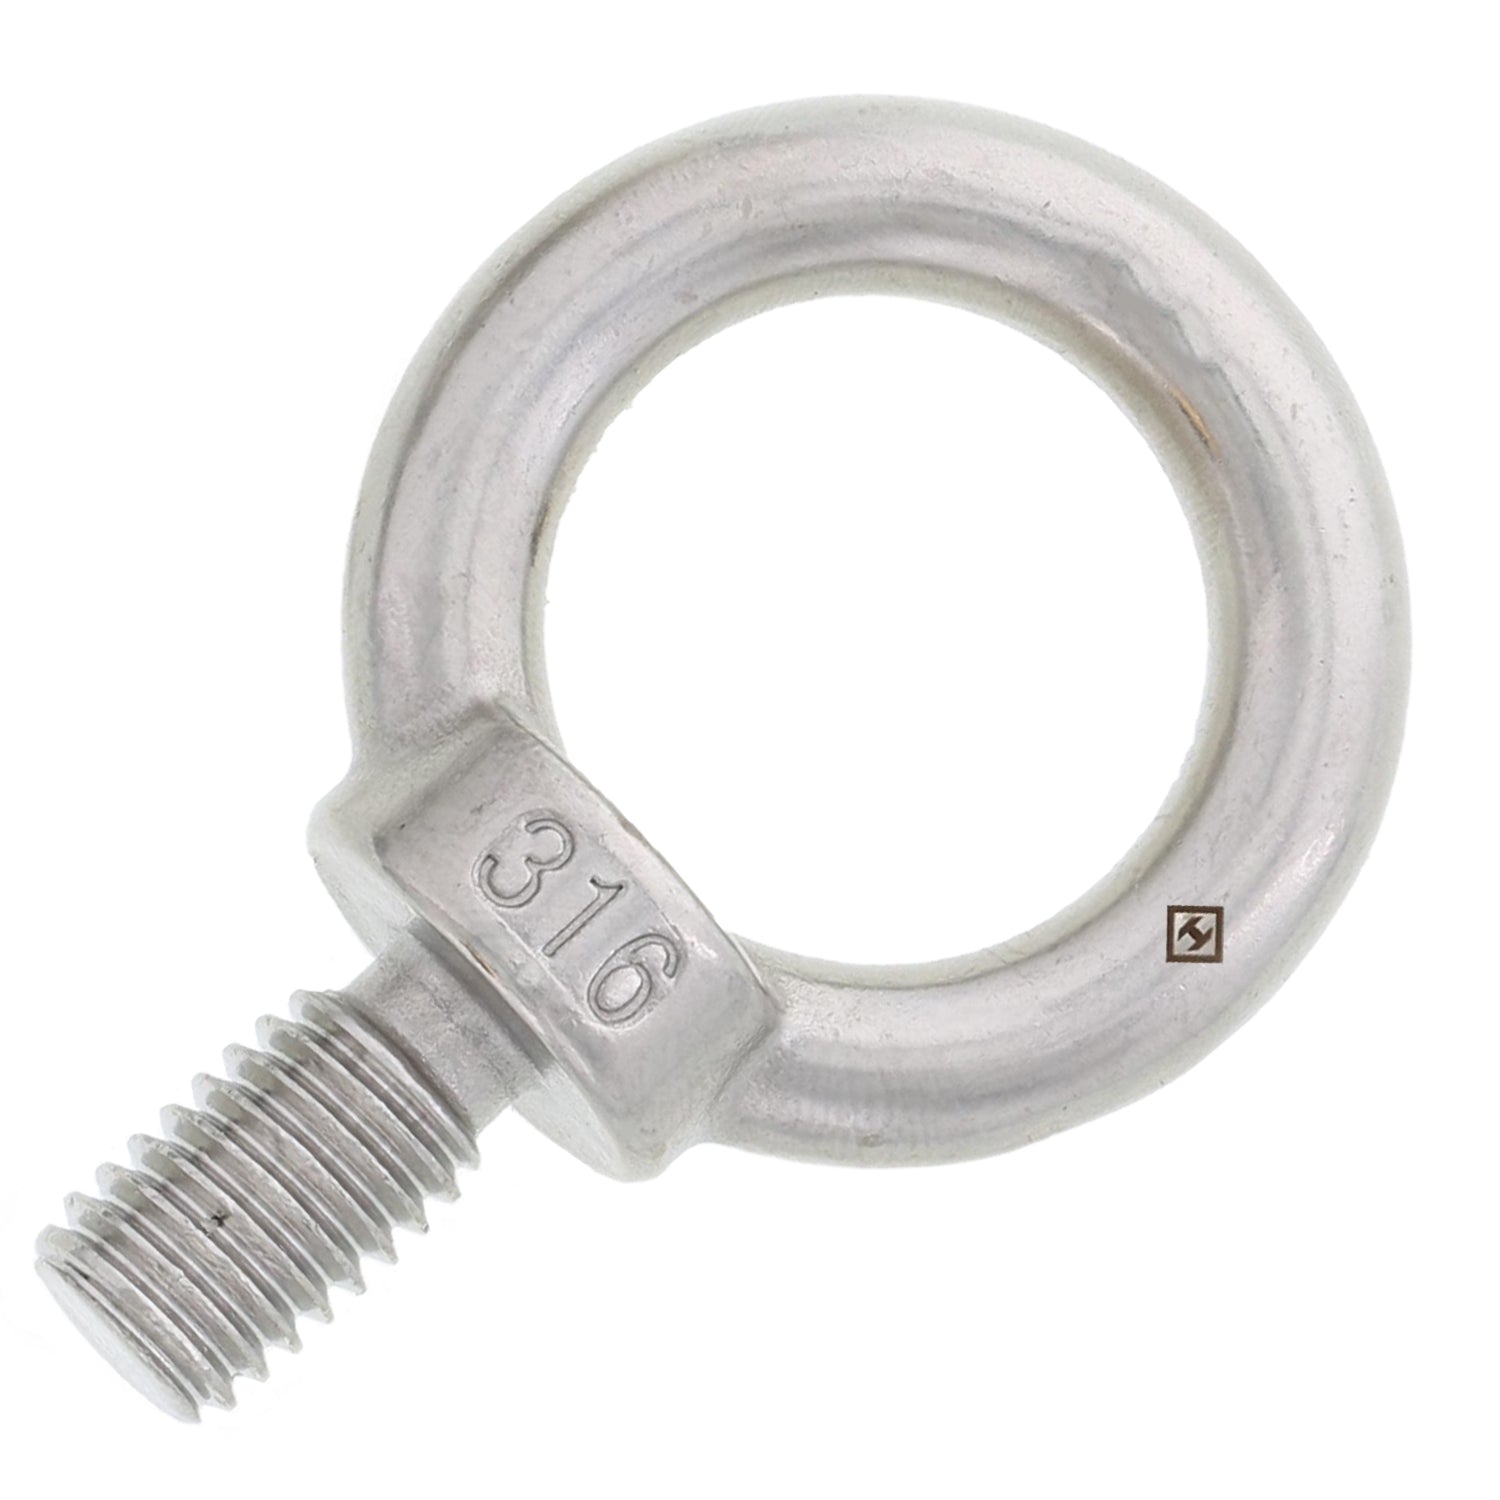 3/8 x 11/16 Machinery Eye Bolt, Stainless Steel 5421